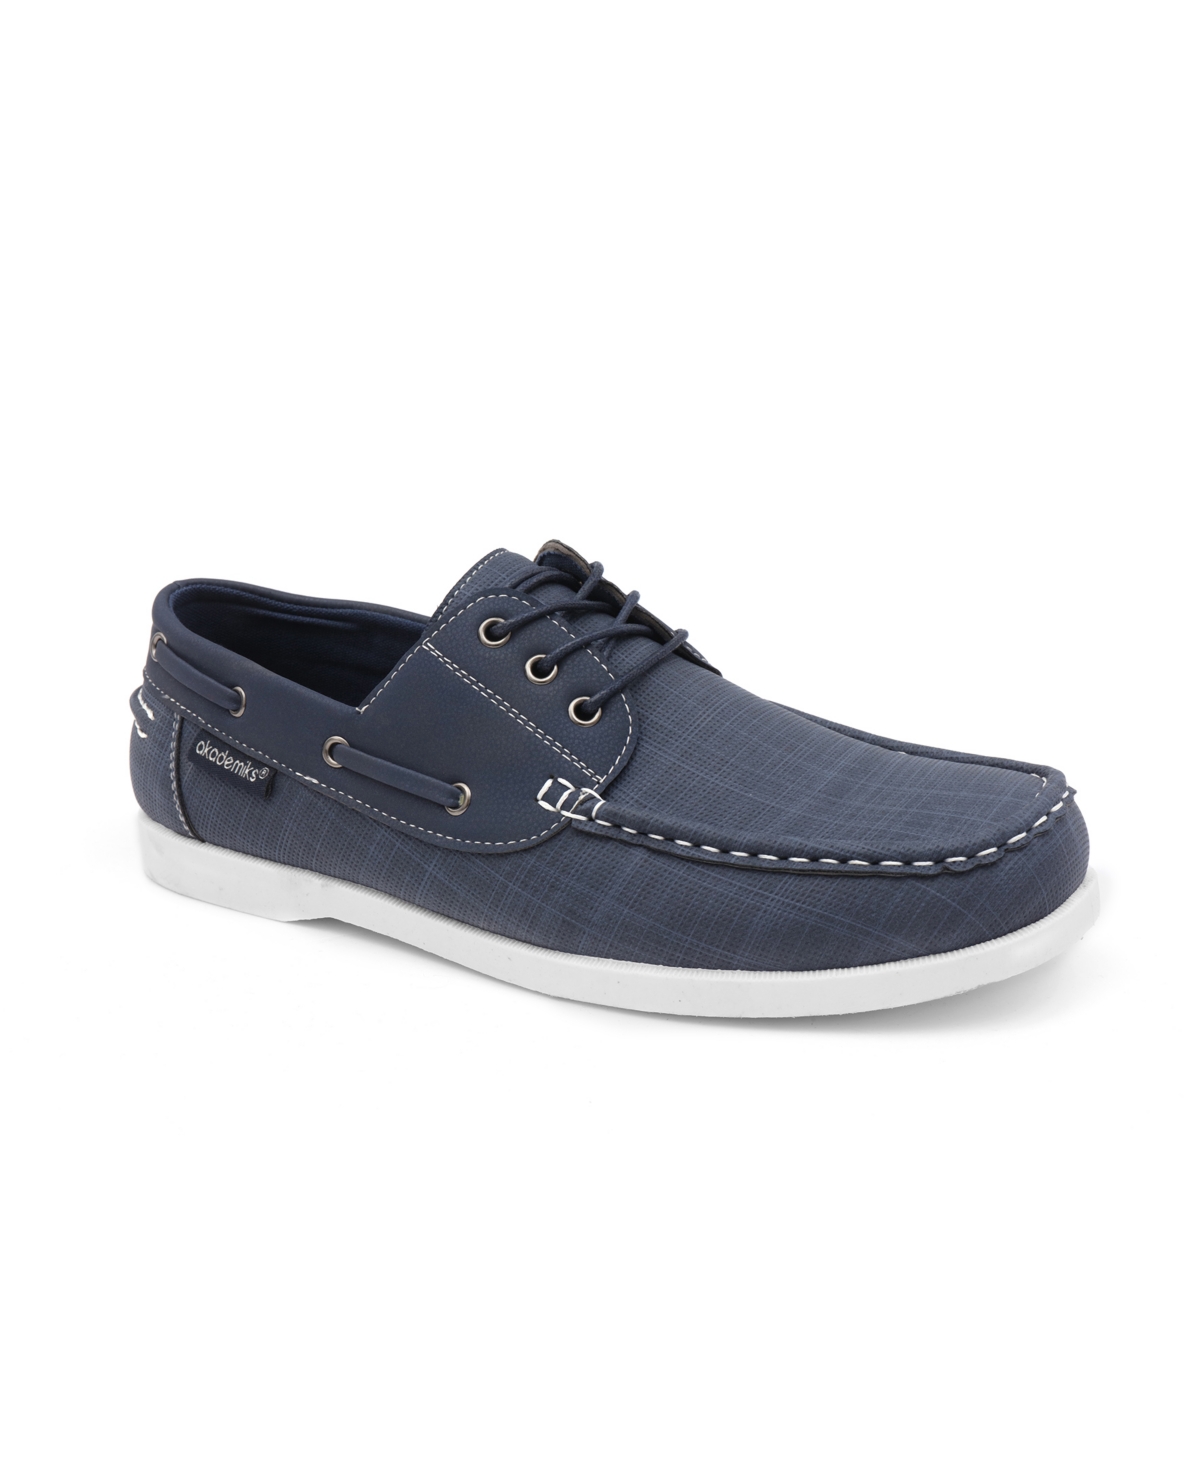 Akademiks Men's Marina 2.0 Lace-up Boat Shoes Men's Shoes In Navy